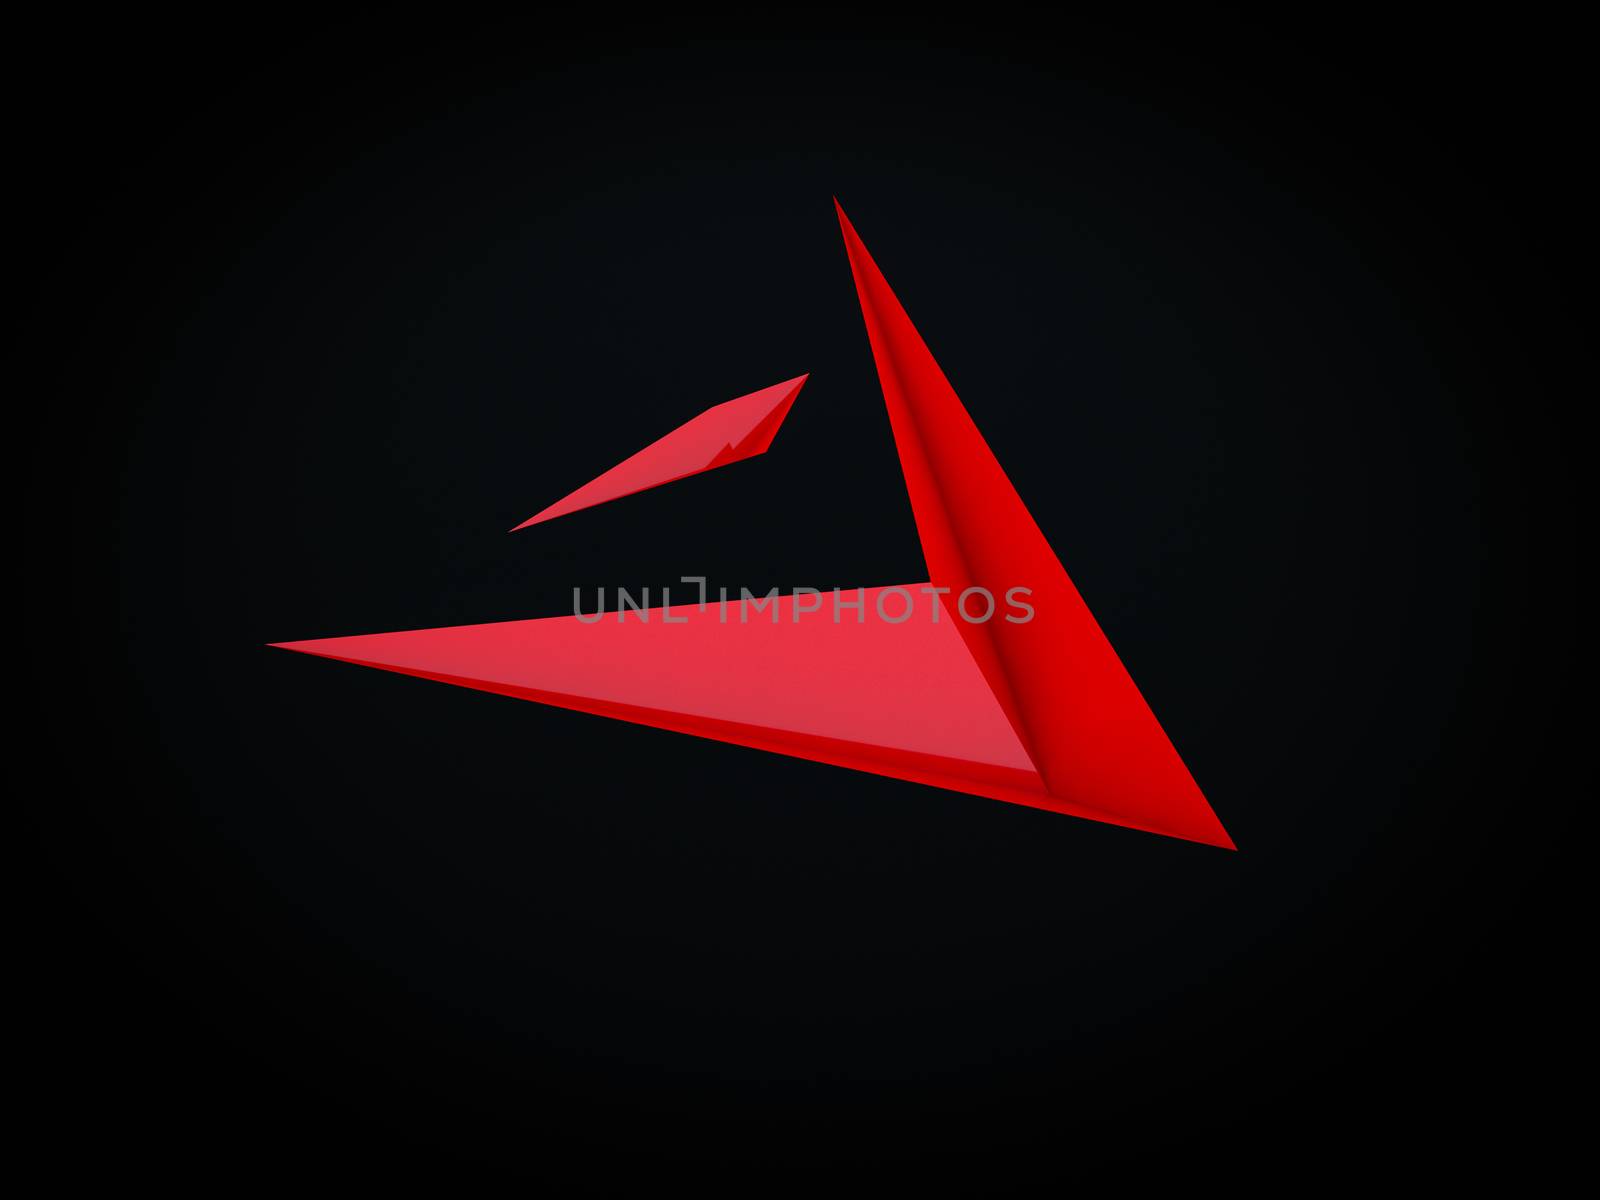 3D rendering of abstract modern abyss shape background